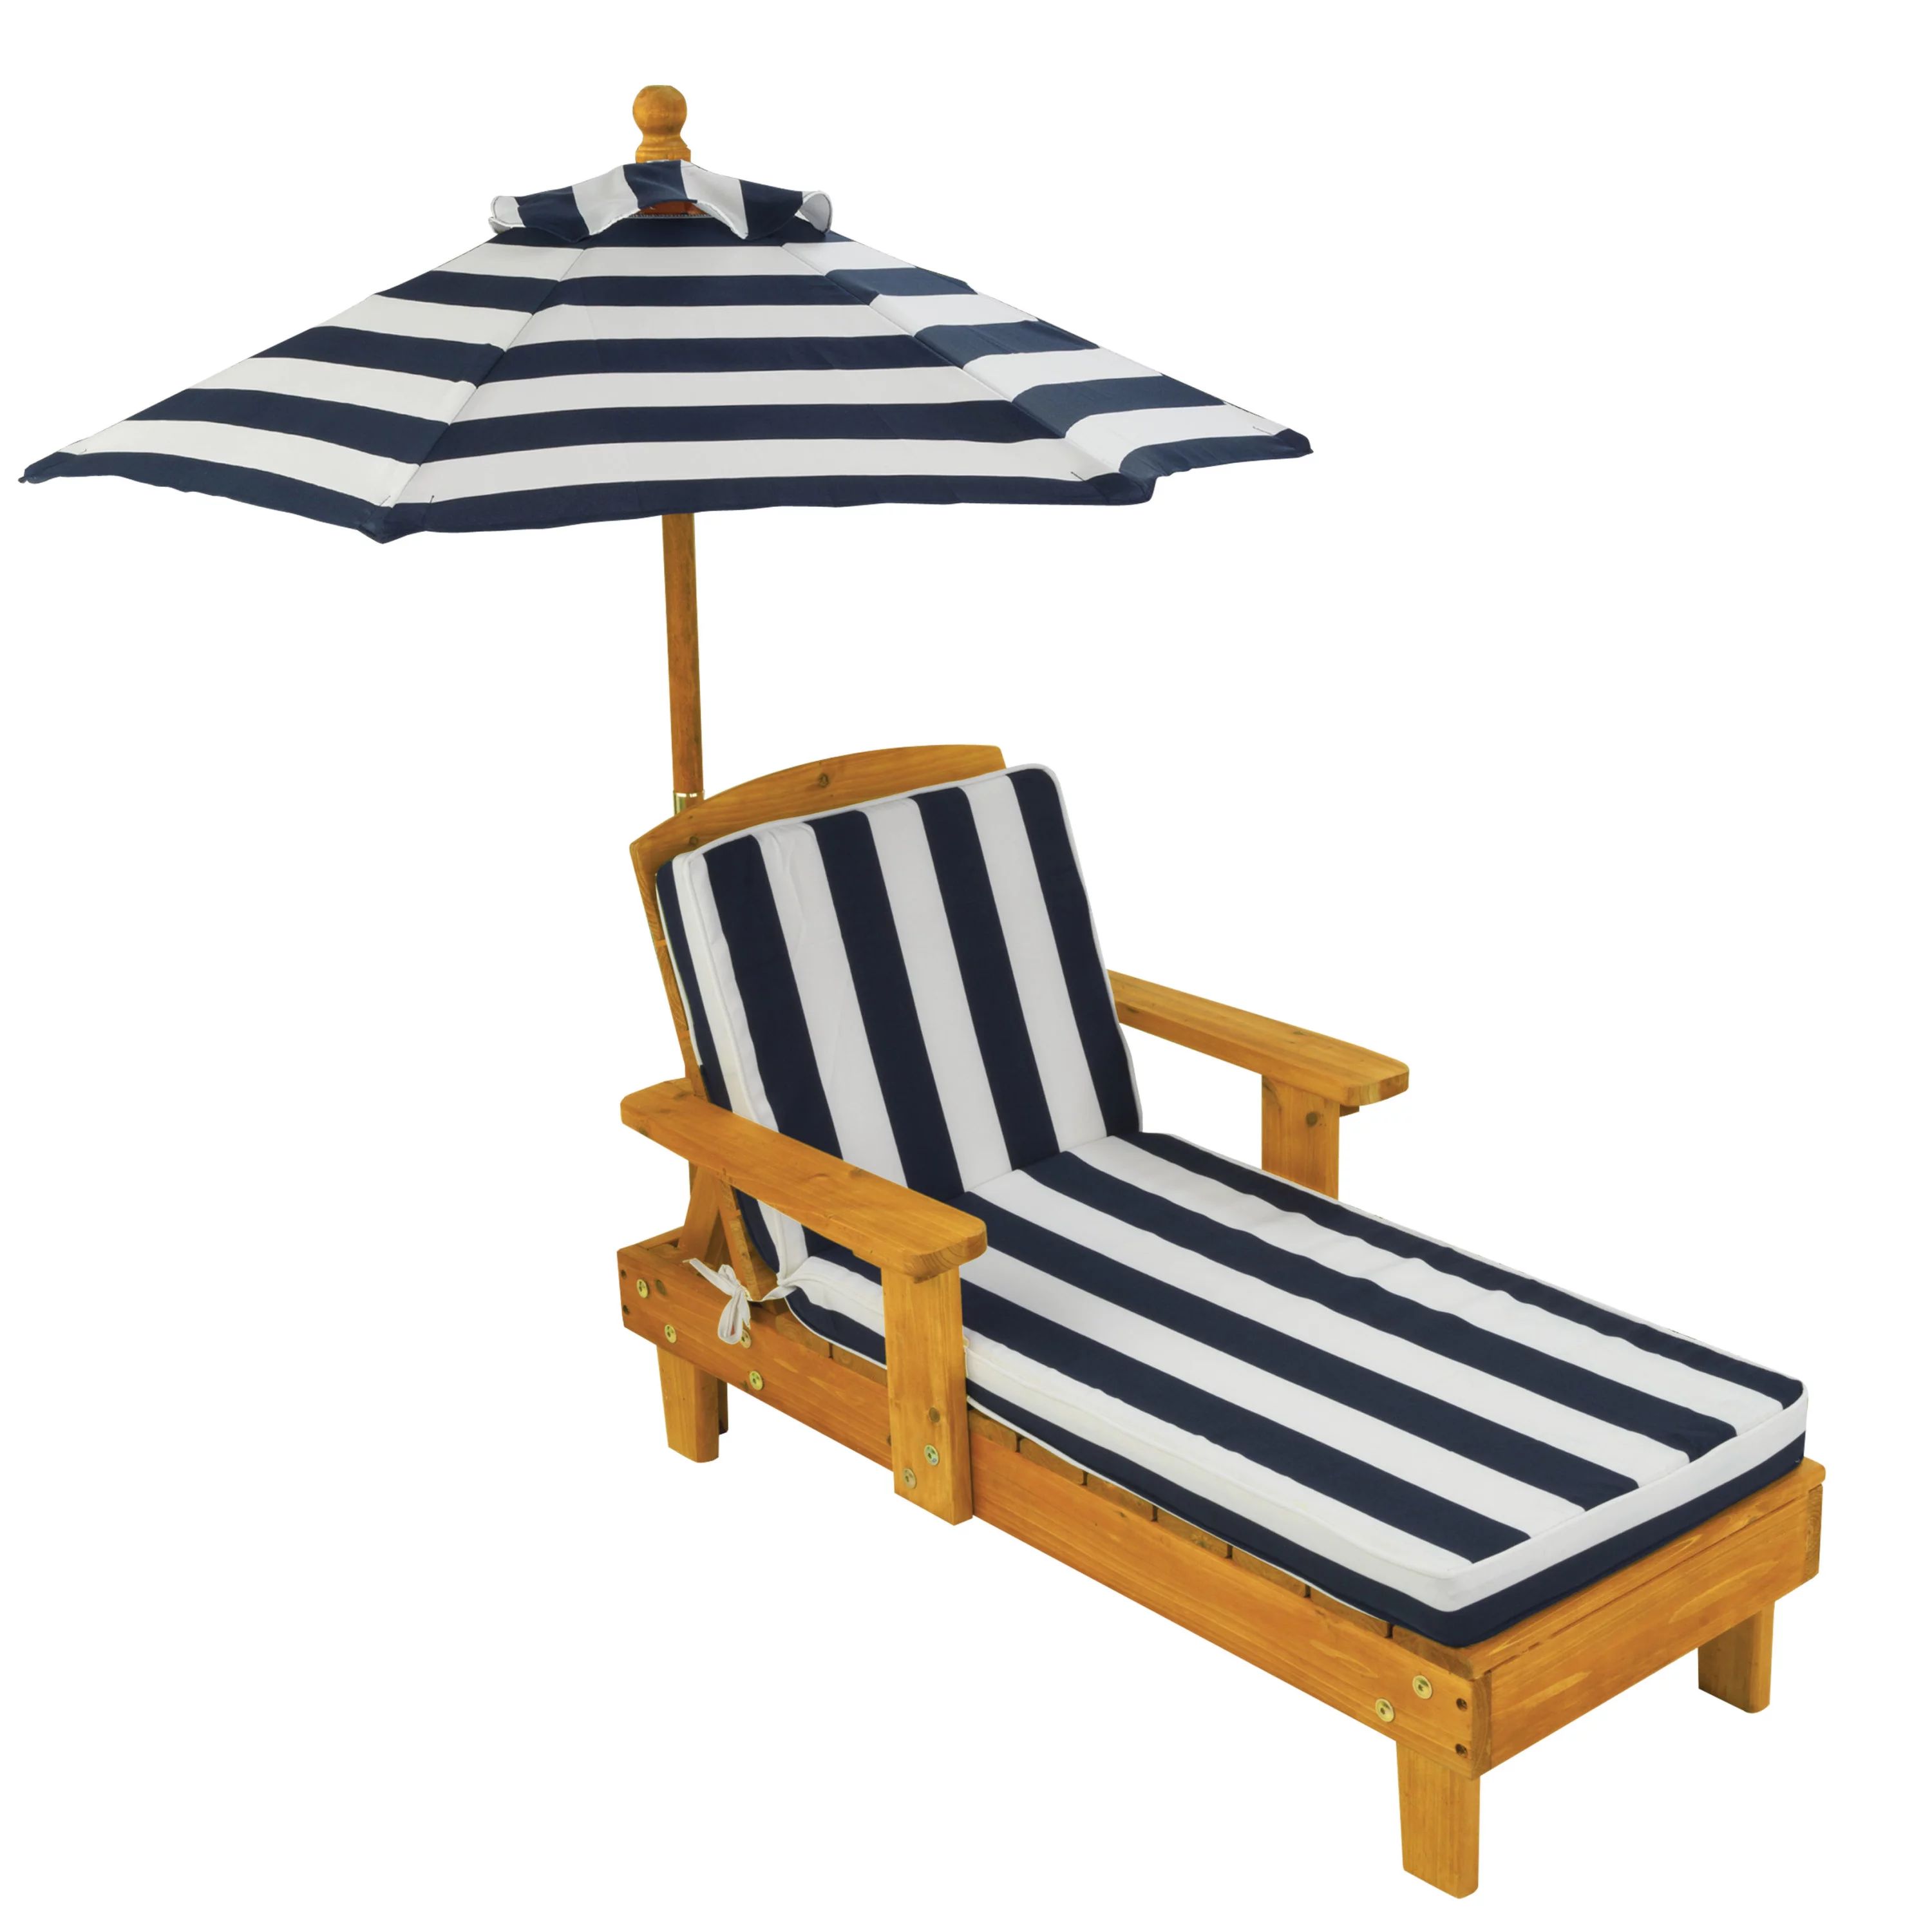 KidKraft Outdoor Wood Chaise Children's Chair with Umbrella and Cushion, Navy and White | Walmart (US)